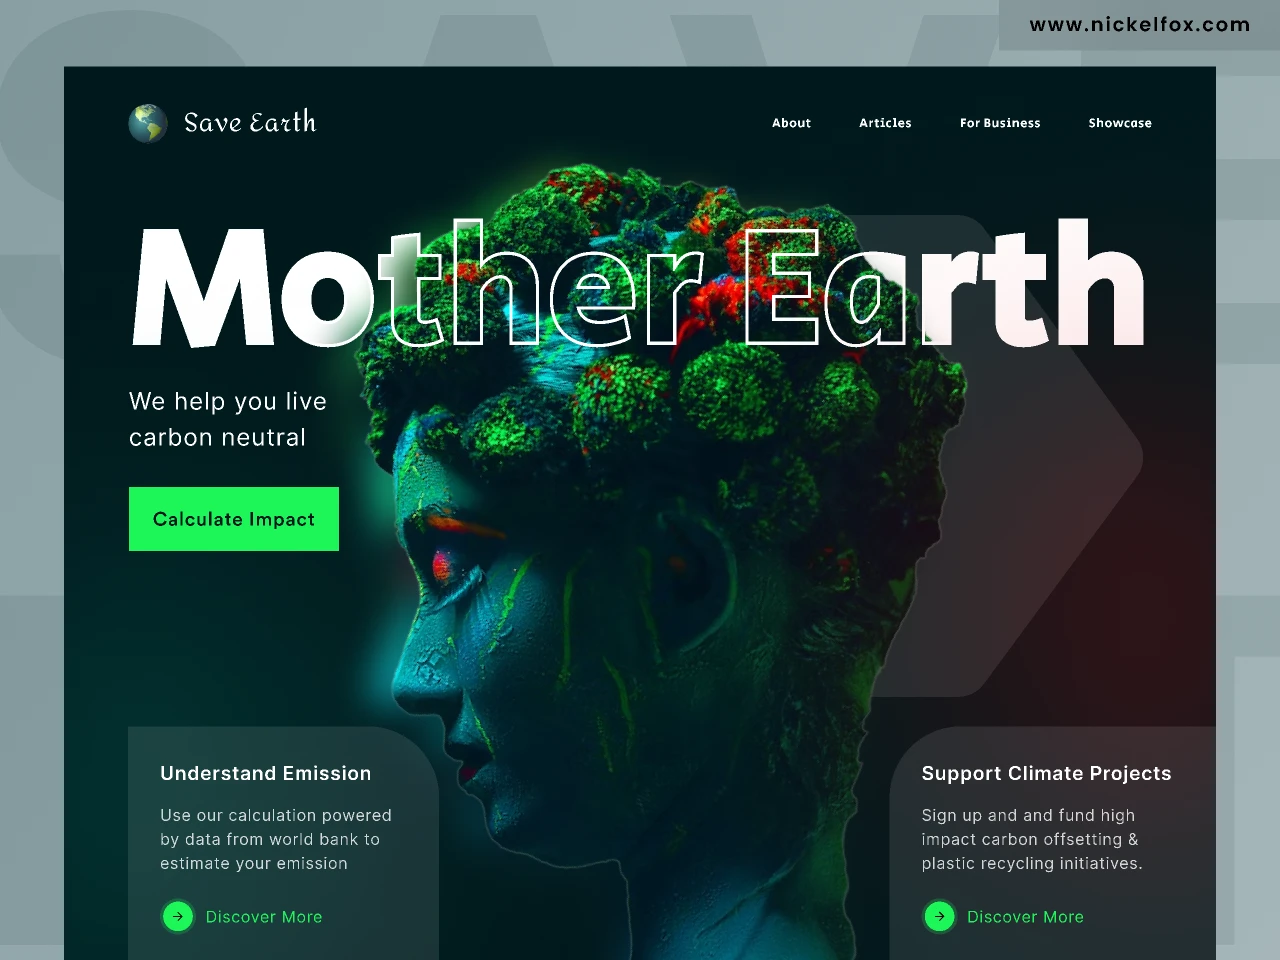 Save Earth Website Design: Landing web page for Figma and Adobe XD